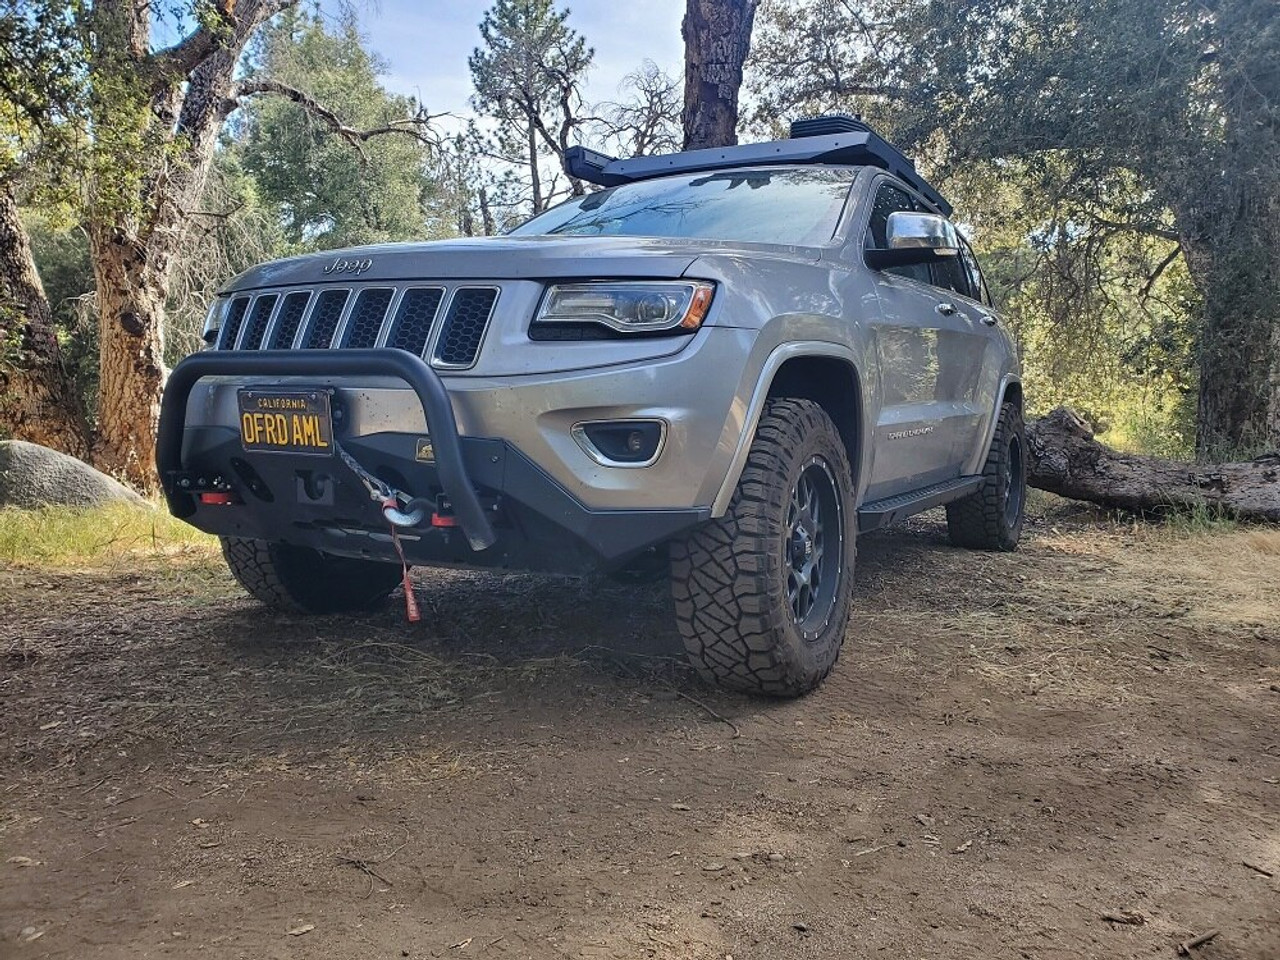 Wk2 steel front bumper with nudge bar